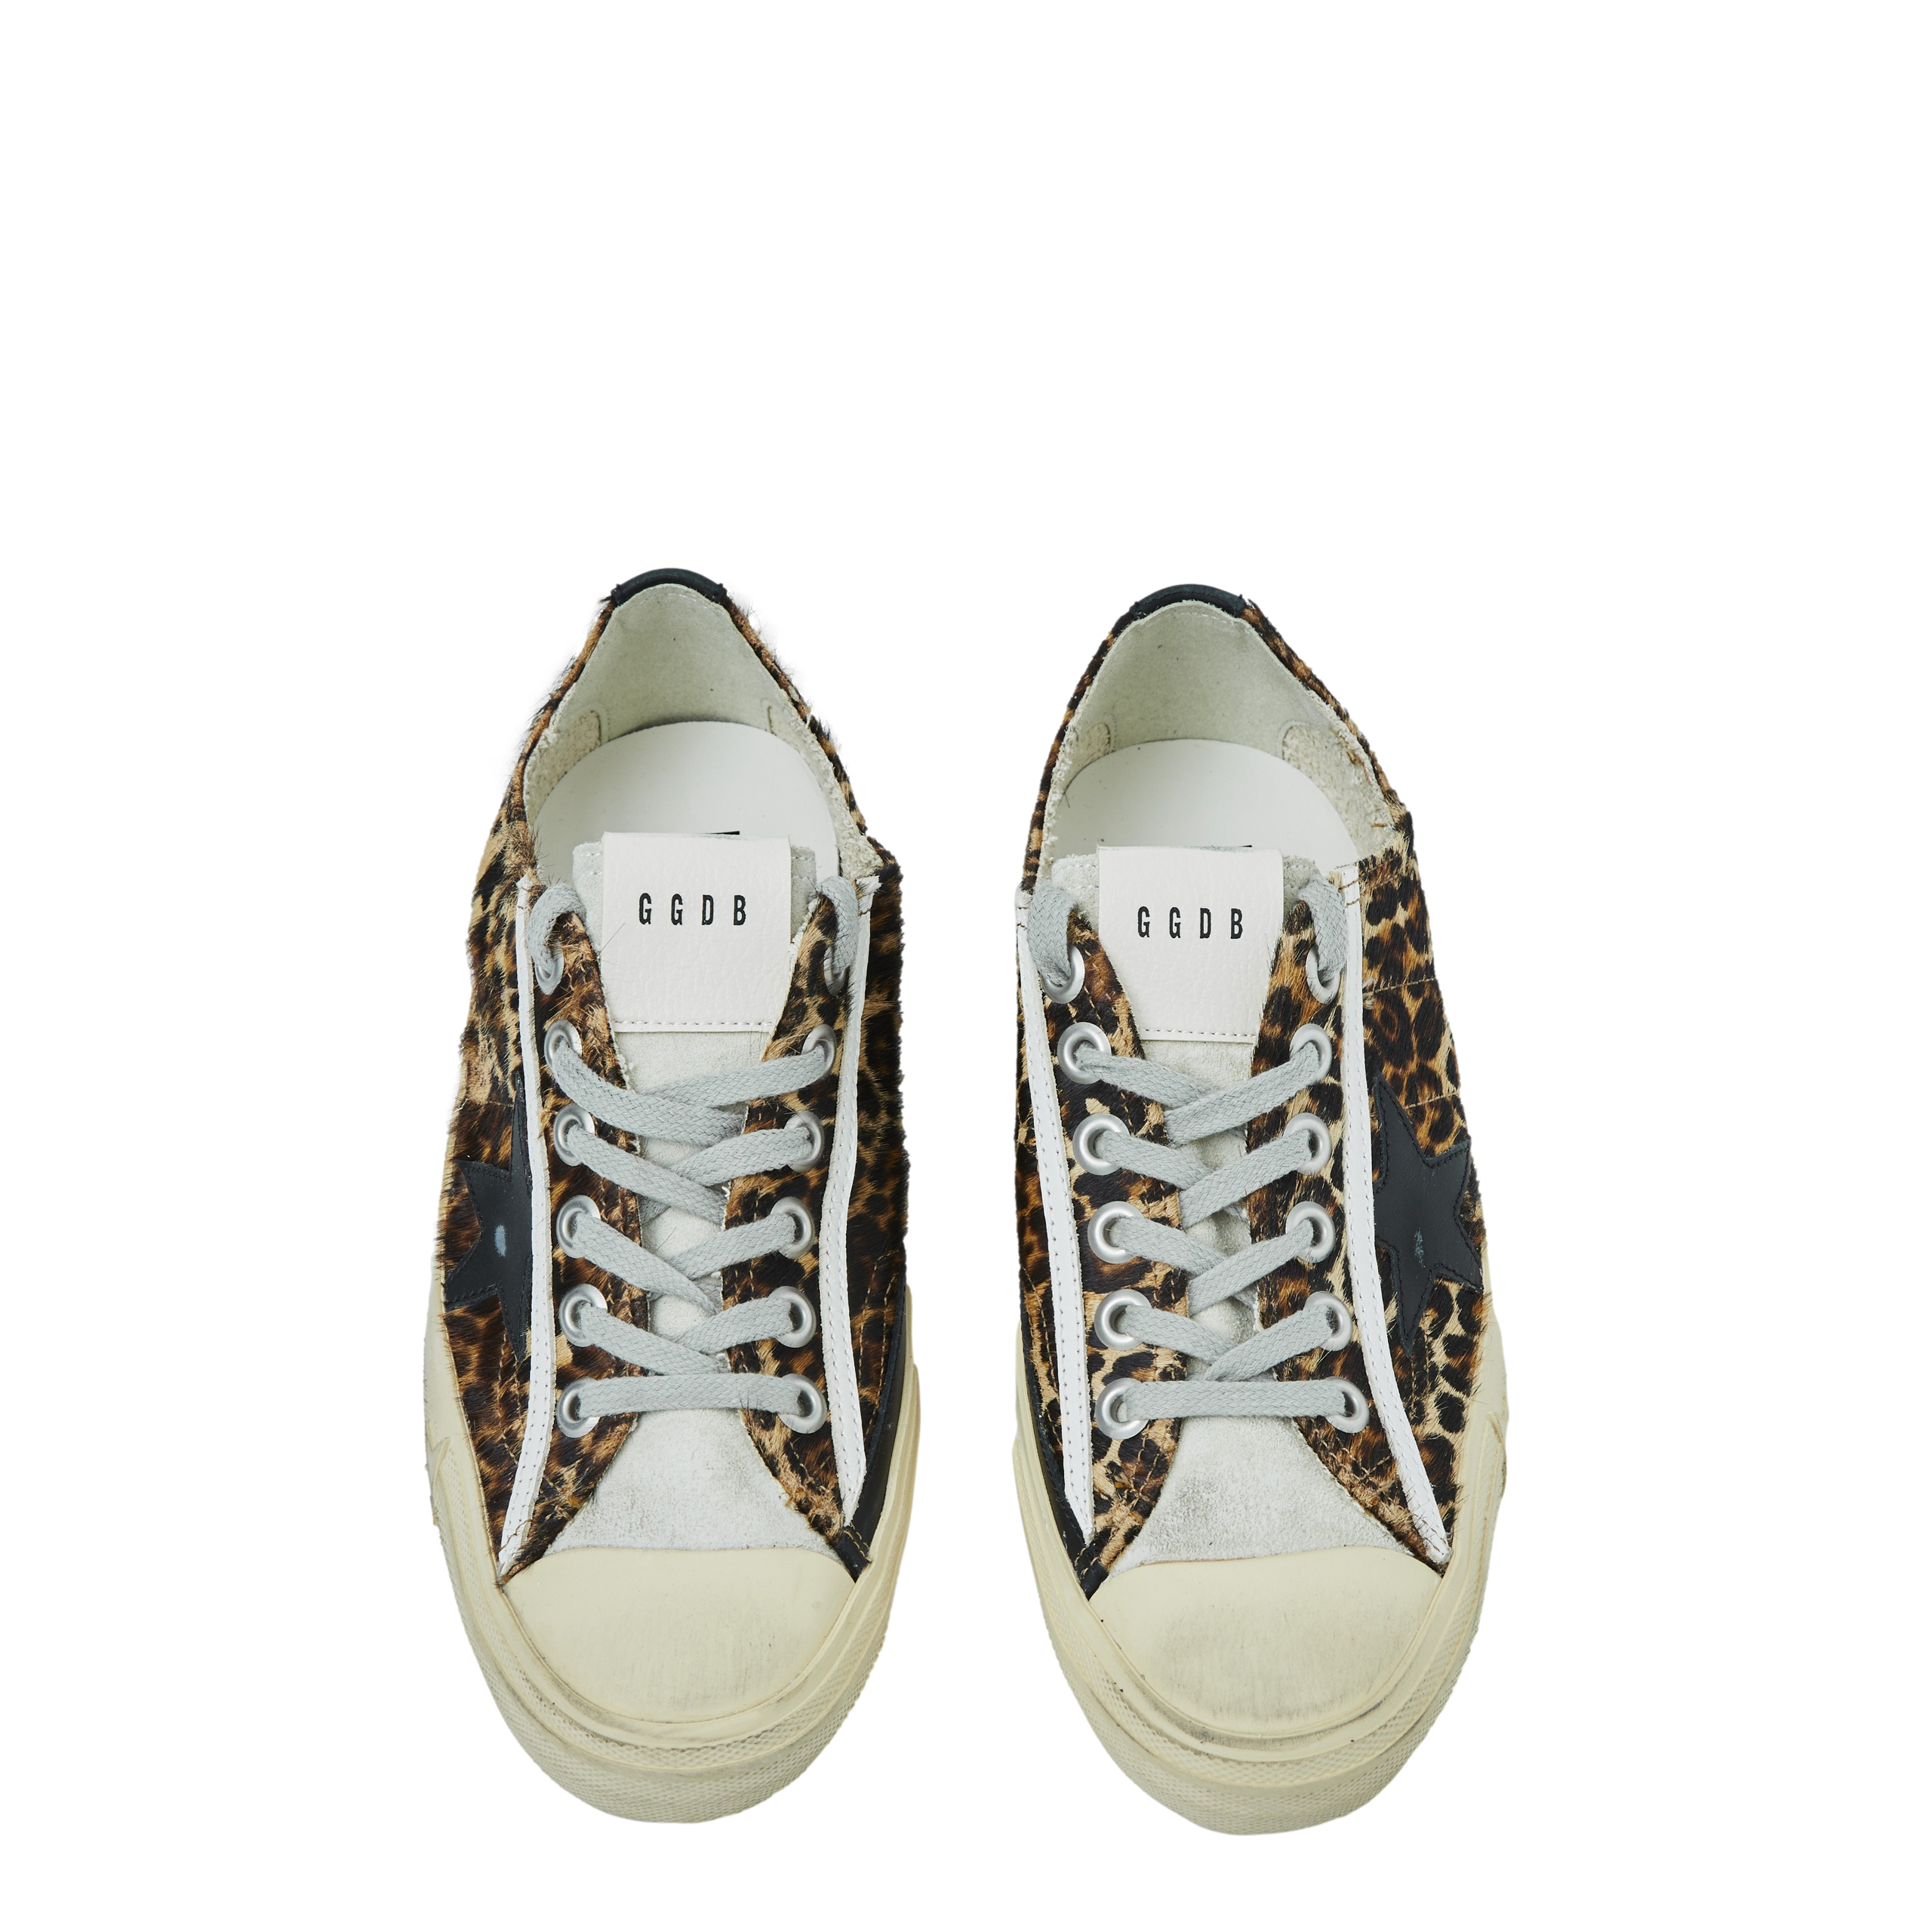 None Golden Goose Deluxe Brand GWF00129/F005030/81629, размер 39;40 GWF00129/F005030/81629 - фото 2